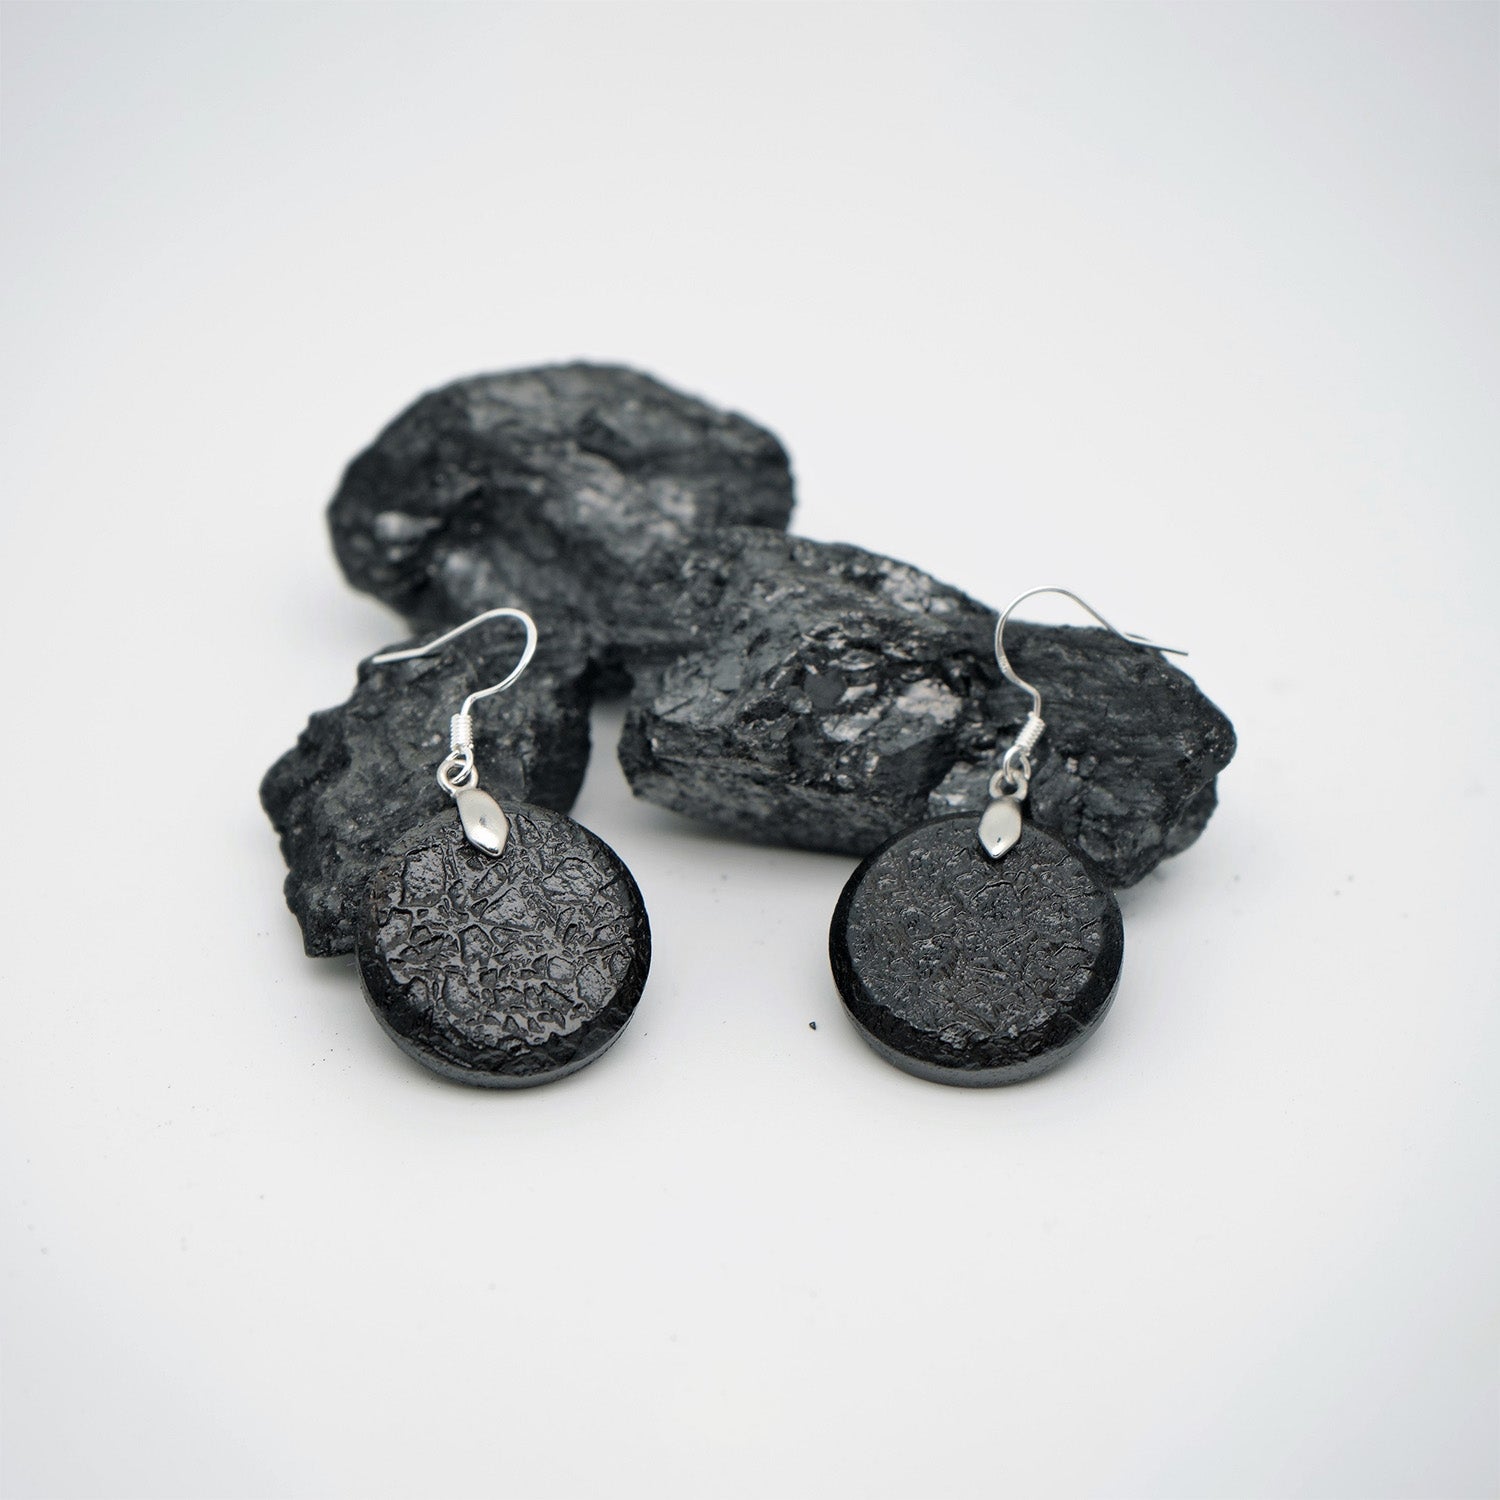 Round earrings in raw charcoal, silver metal